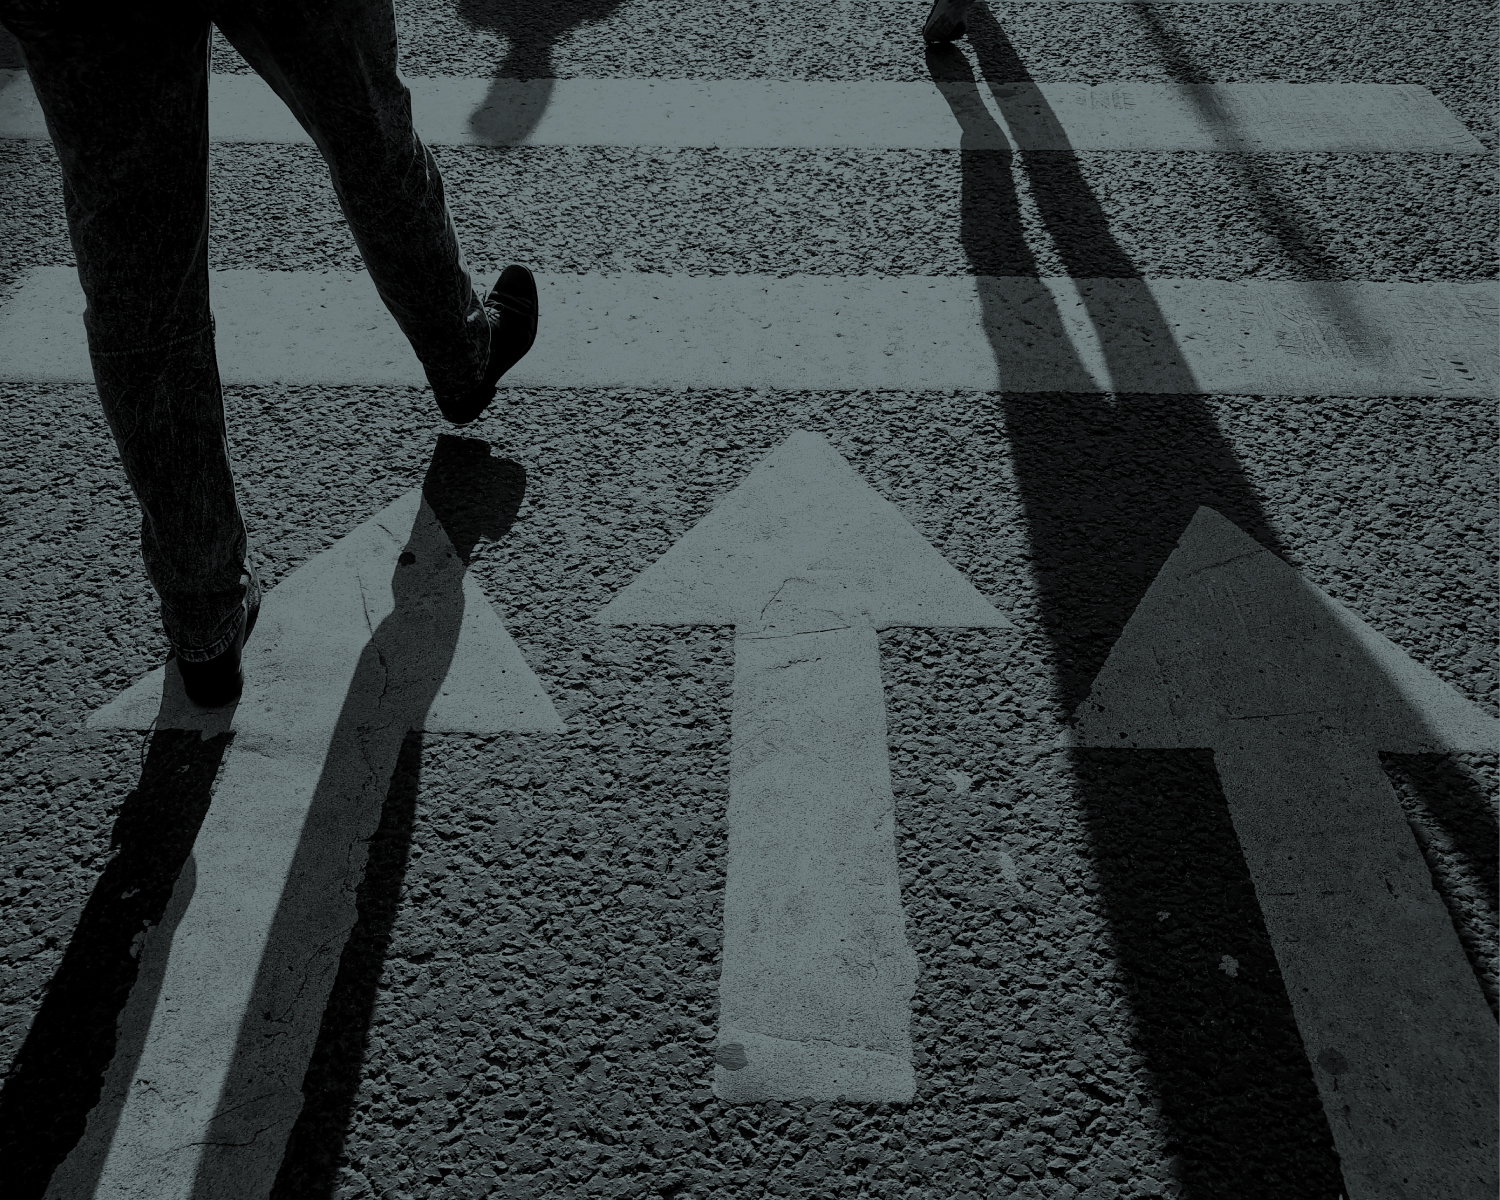 walking on a cross walk | Market Research Firm | Public Opinion Research | Meeting St. Insights